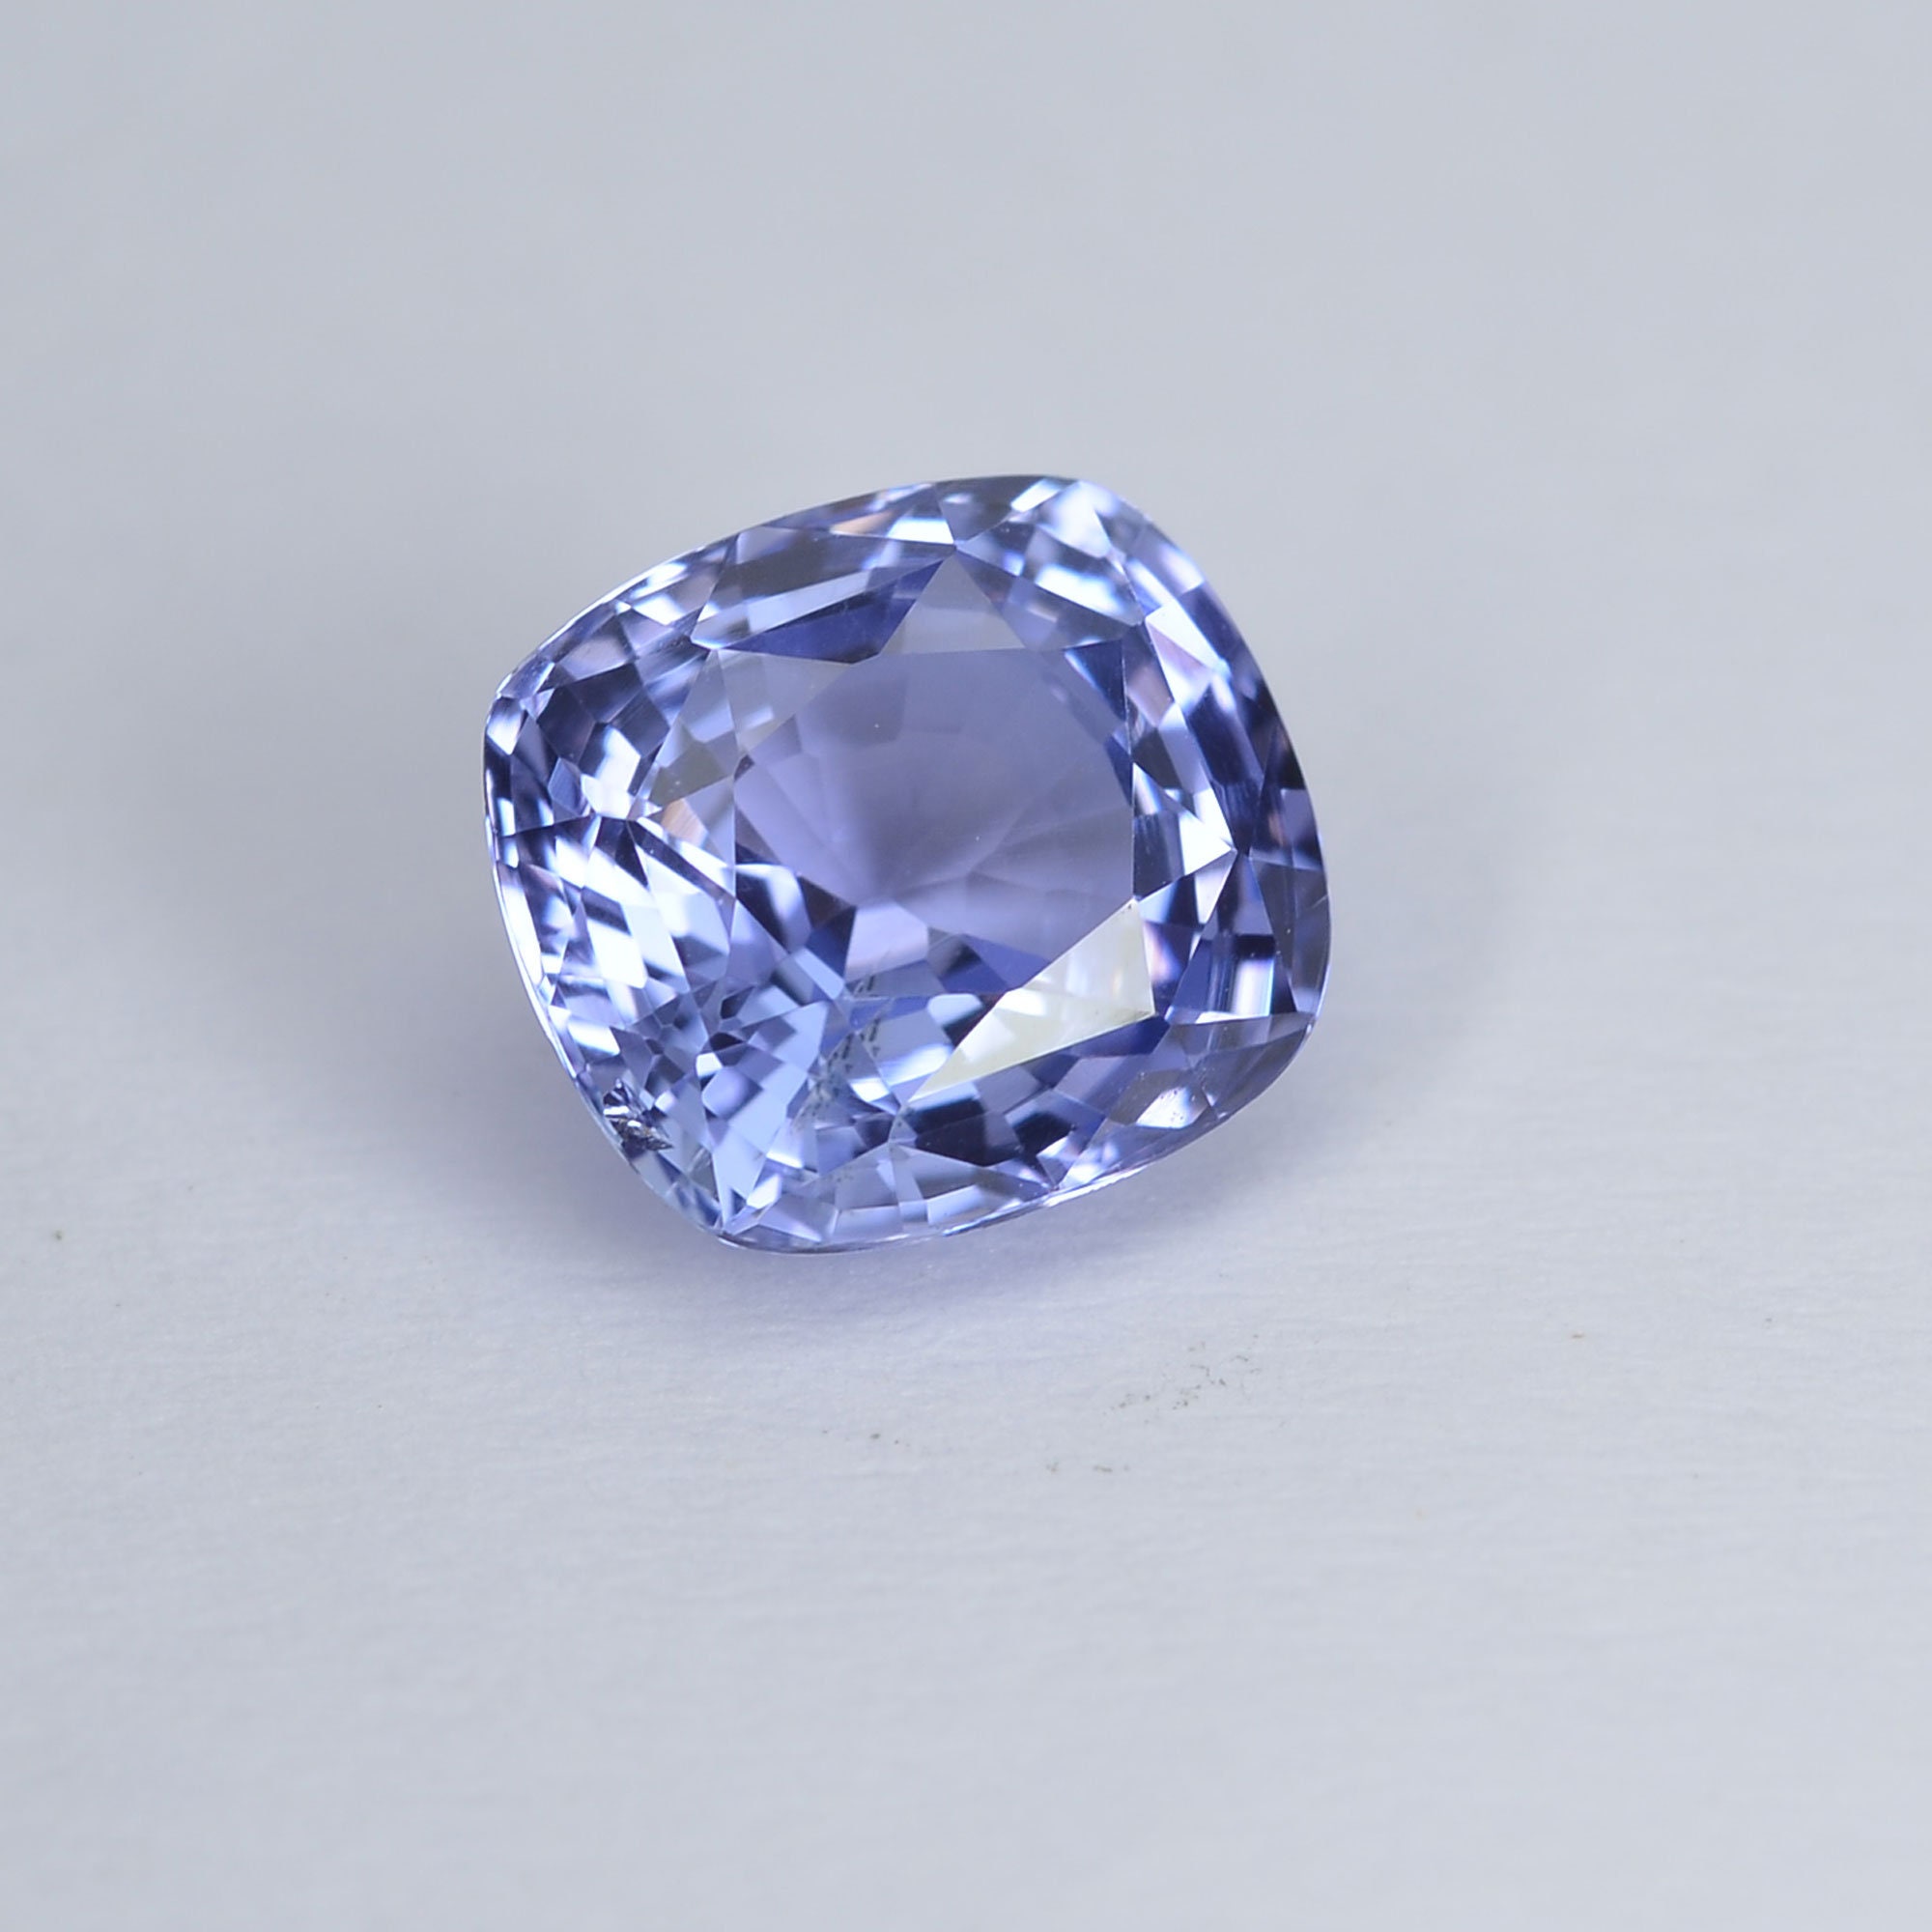 1.74 Cts Unheated Natural Color Change Violet to Blue Sapphire - Etsy